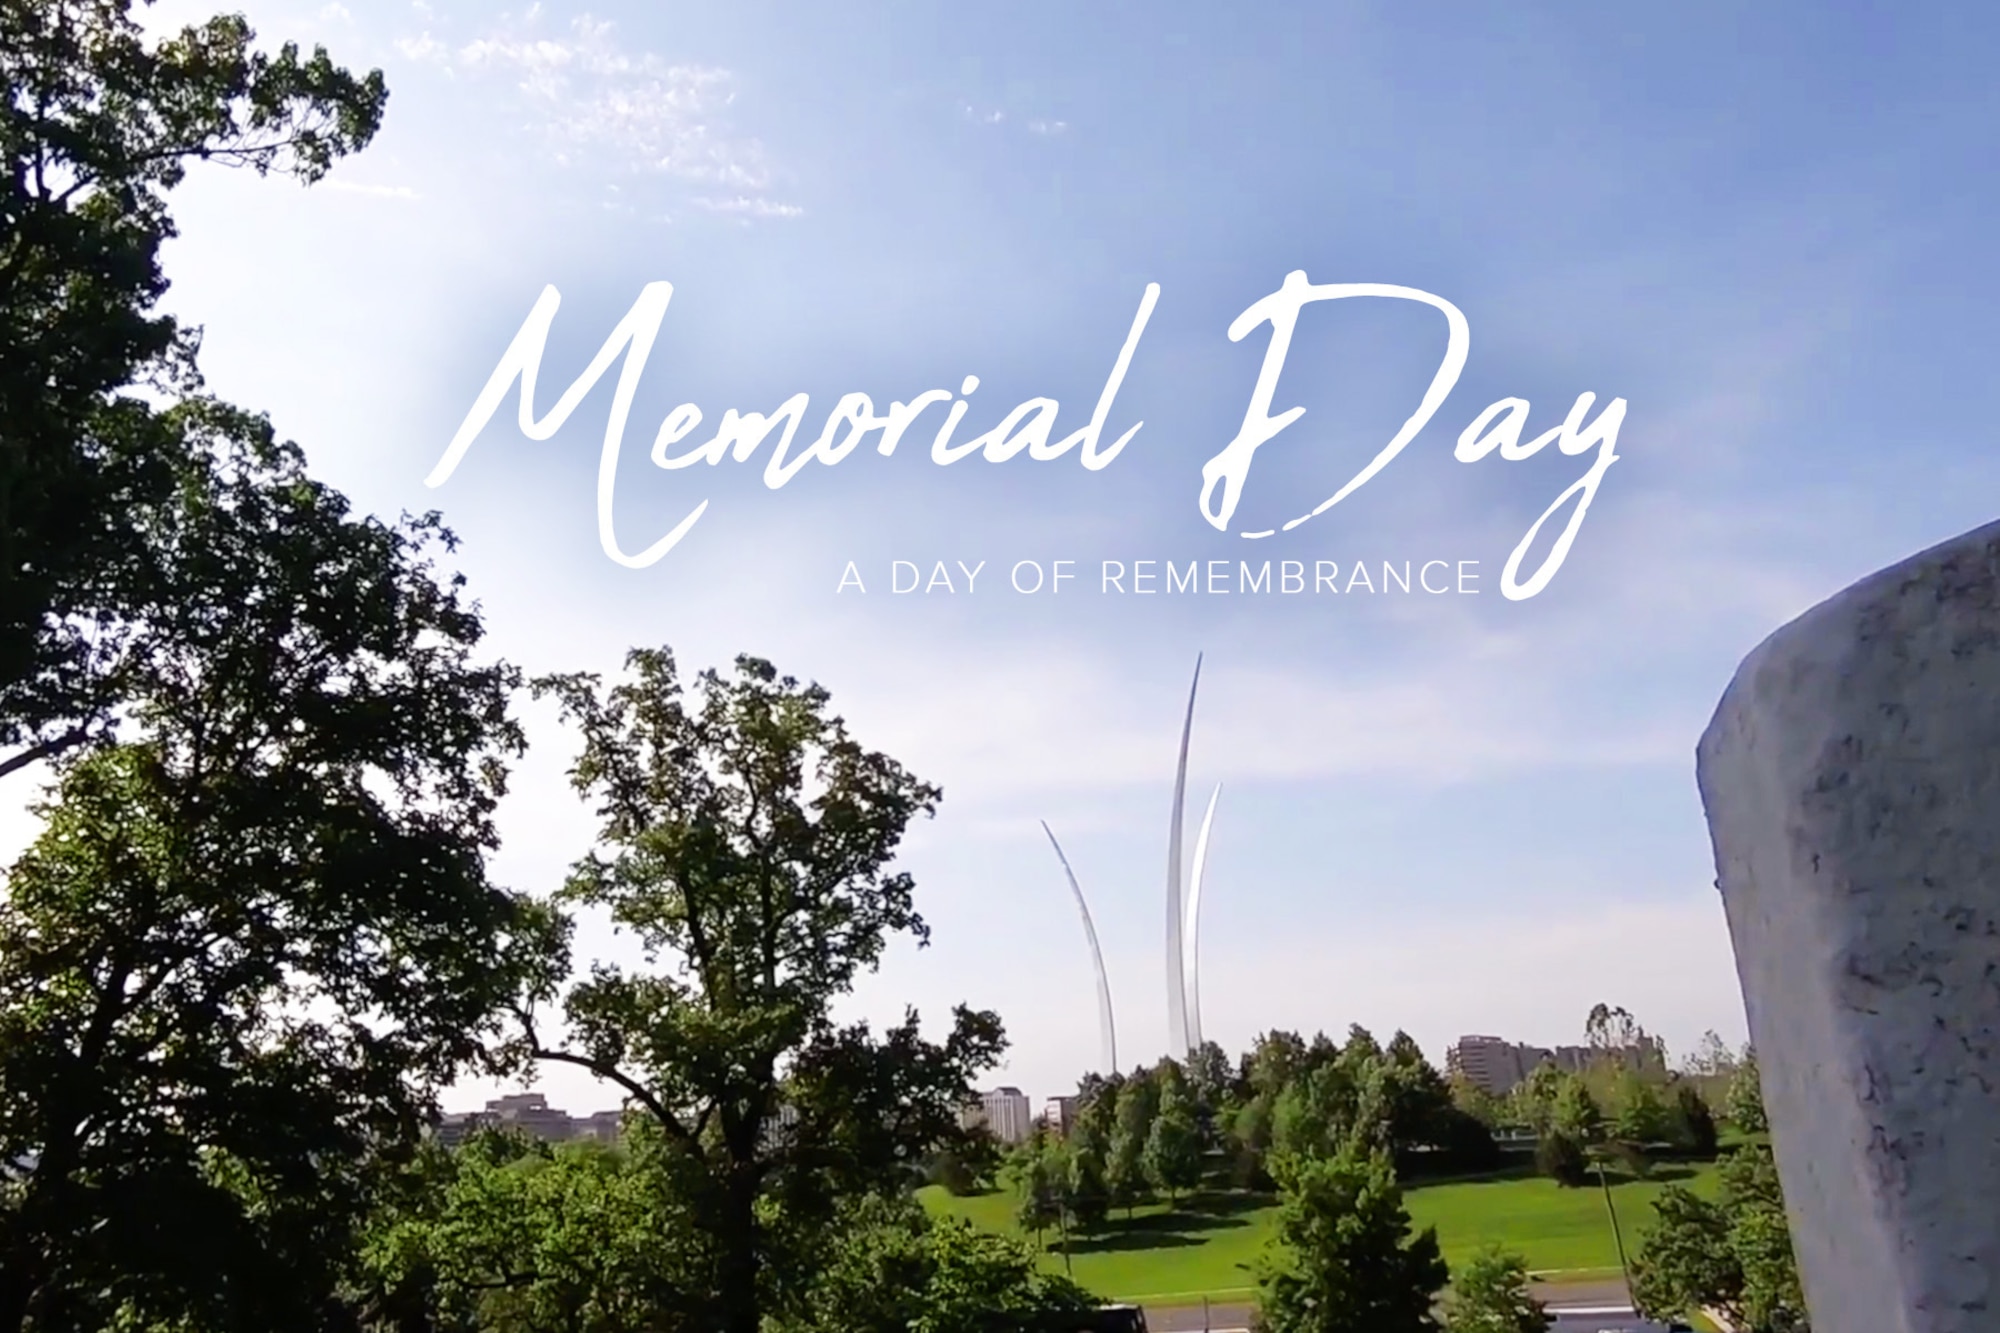 Memorial Day is upon us. During the parades, barbeques, fun in the sun, and time spent with friends and family, it may be easy to forget the true meaning of this day. (U.S. Air Force graphic by David Perry)